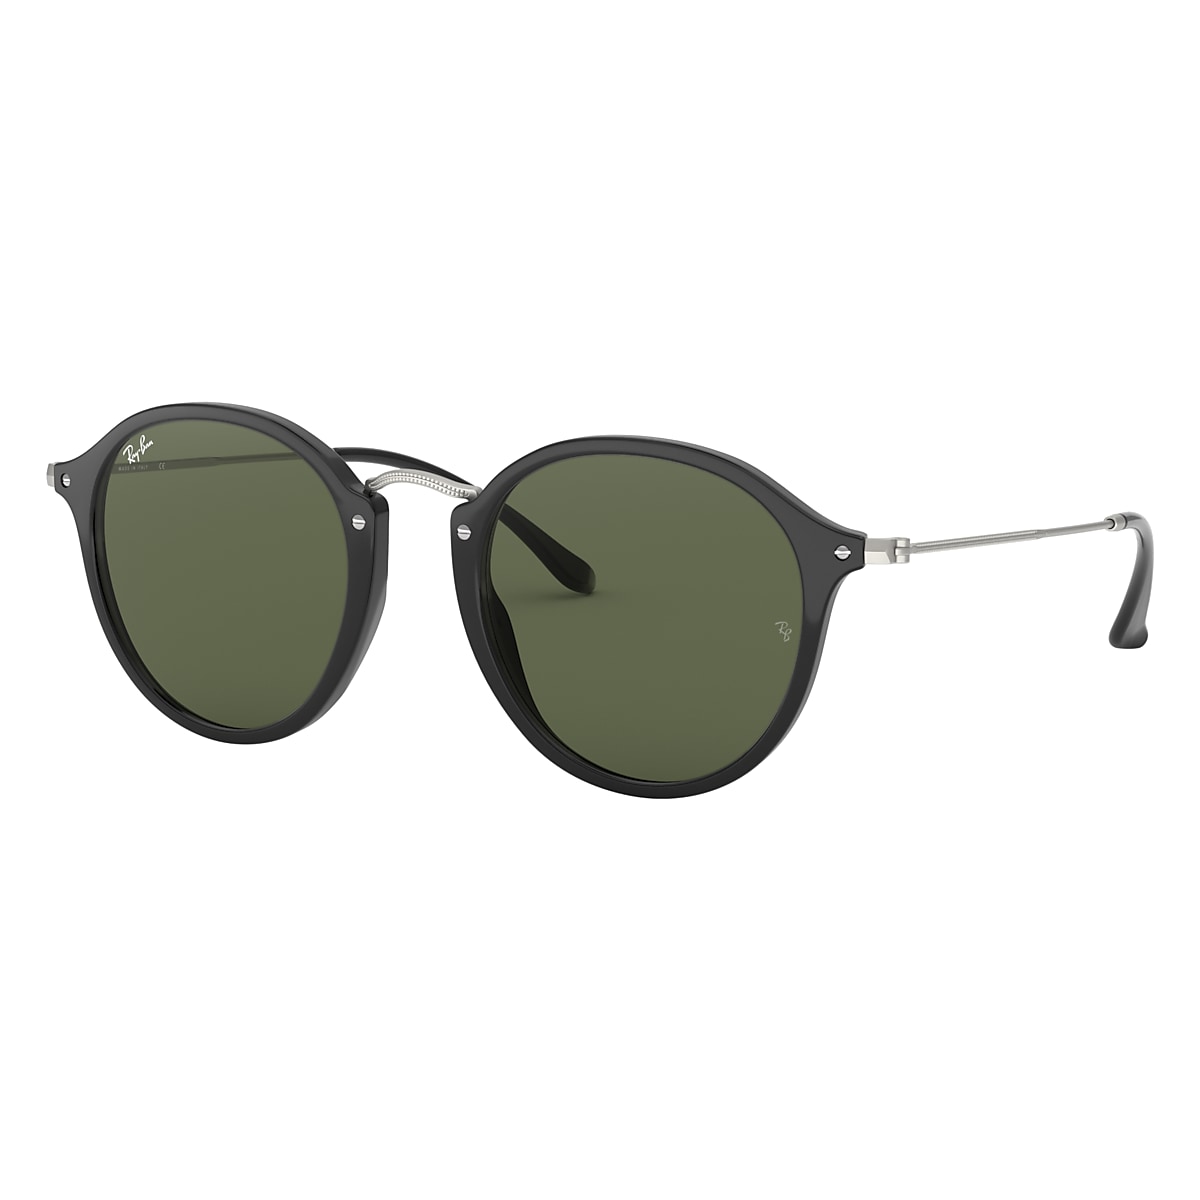 ROUND FLECK Sunglasses in Black and Green - RB2447 - Ray-Ban